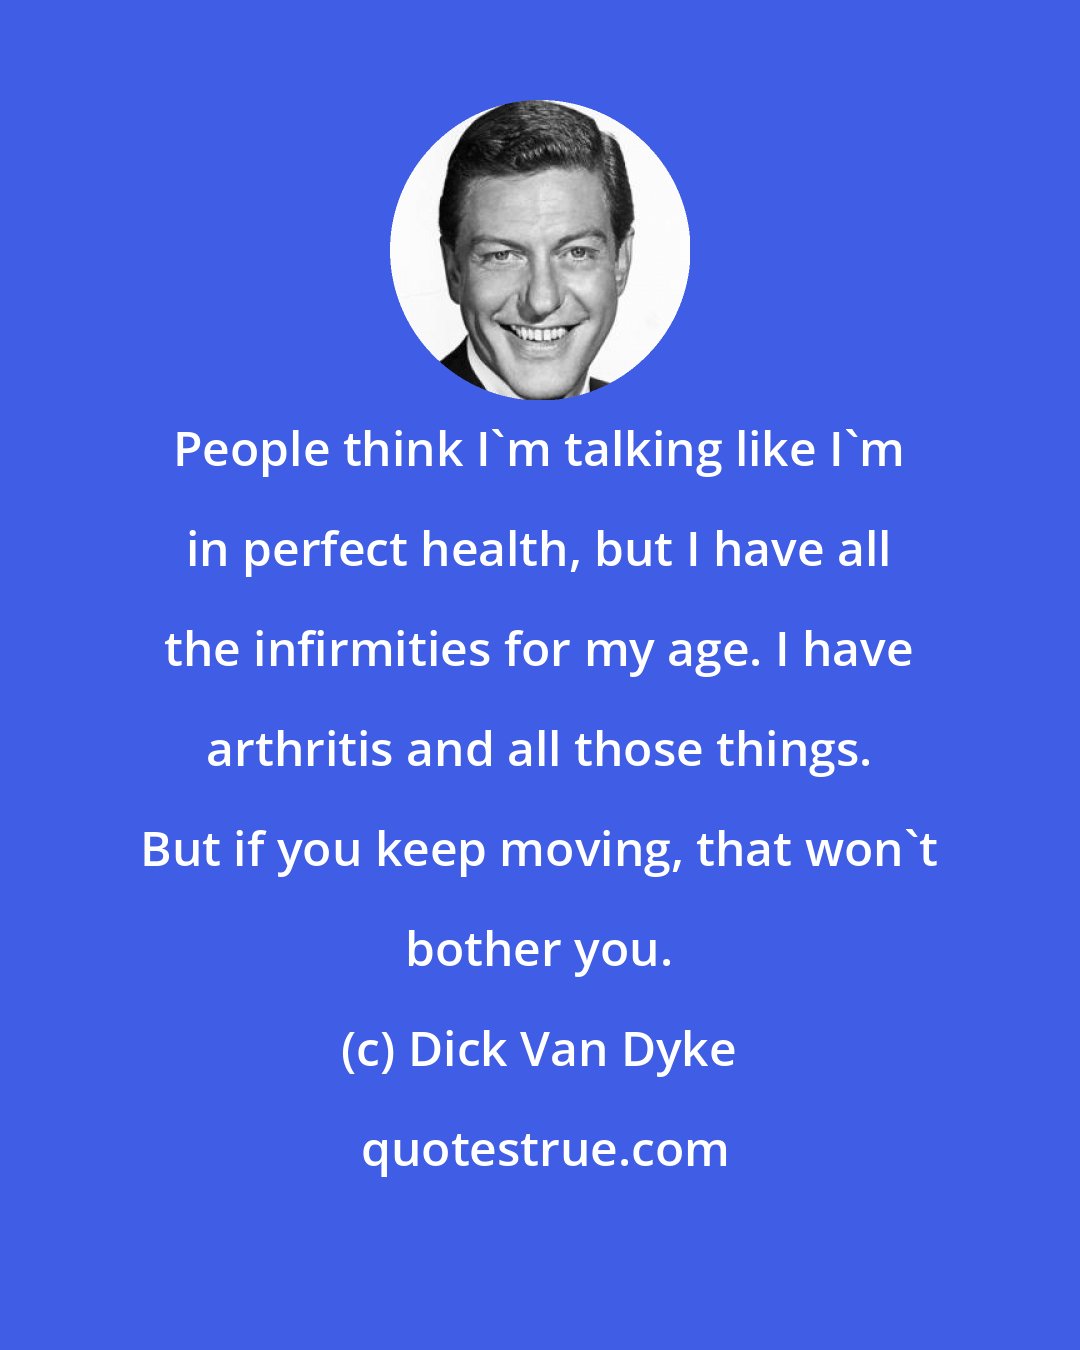 Dick Van Dyke: People think I'm talking like I'm in perfect health, but I have all the infirmities for my age. I have arthritis and all those things. But if you keep moving, that won't bother you.